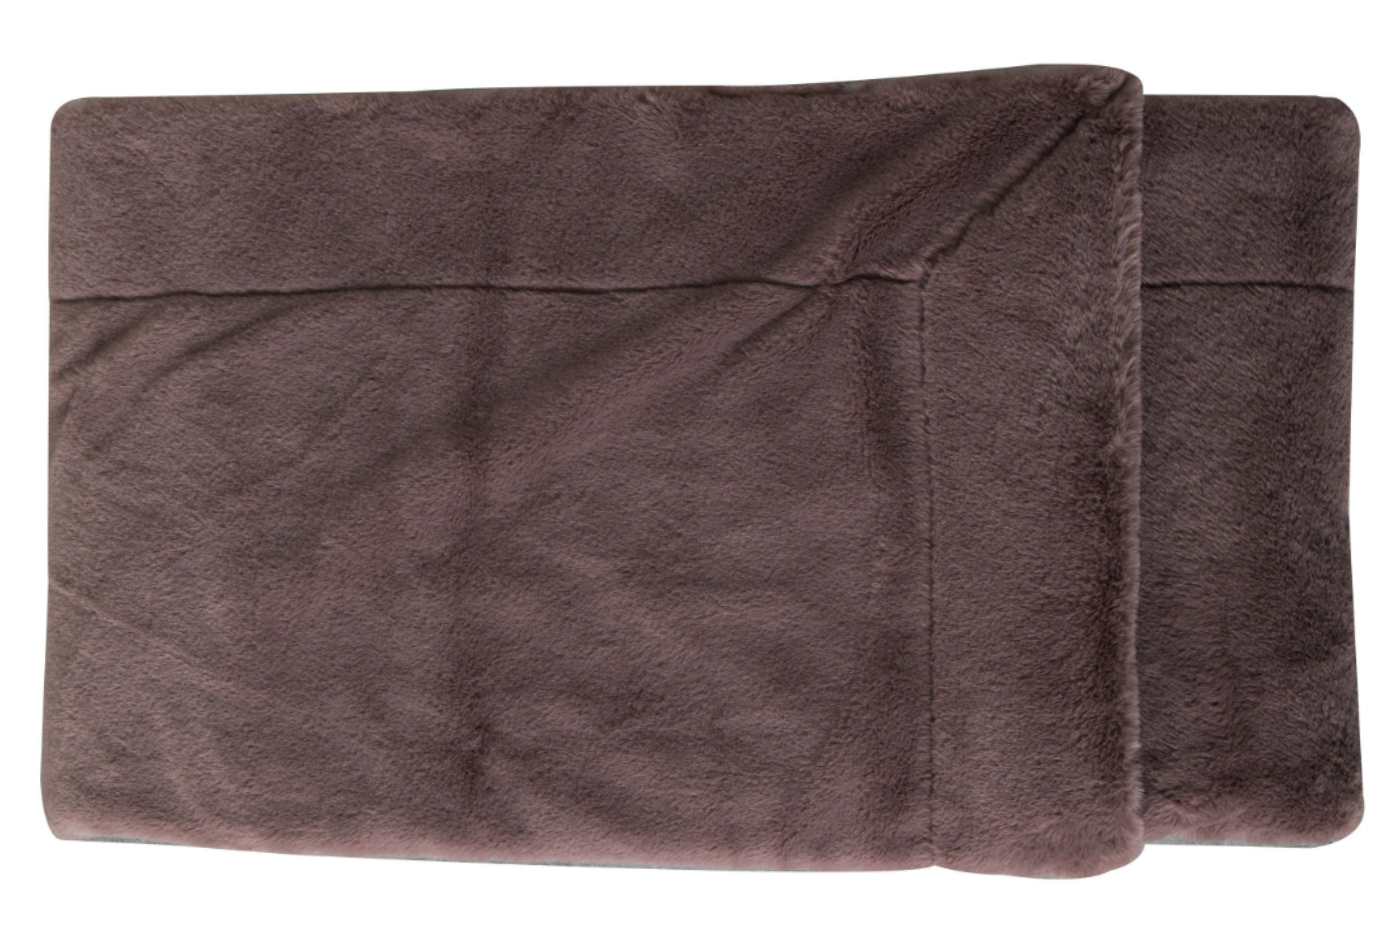 View Mocha Faux Fur Throw With Stitched Fold Over Border Large information